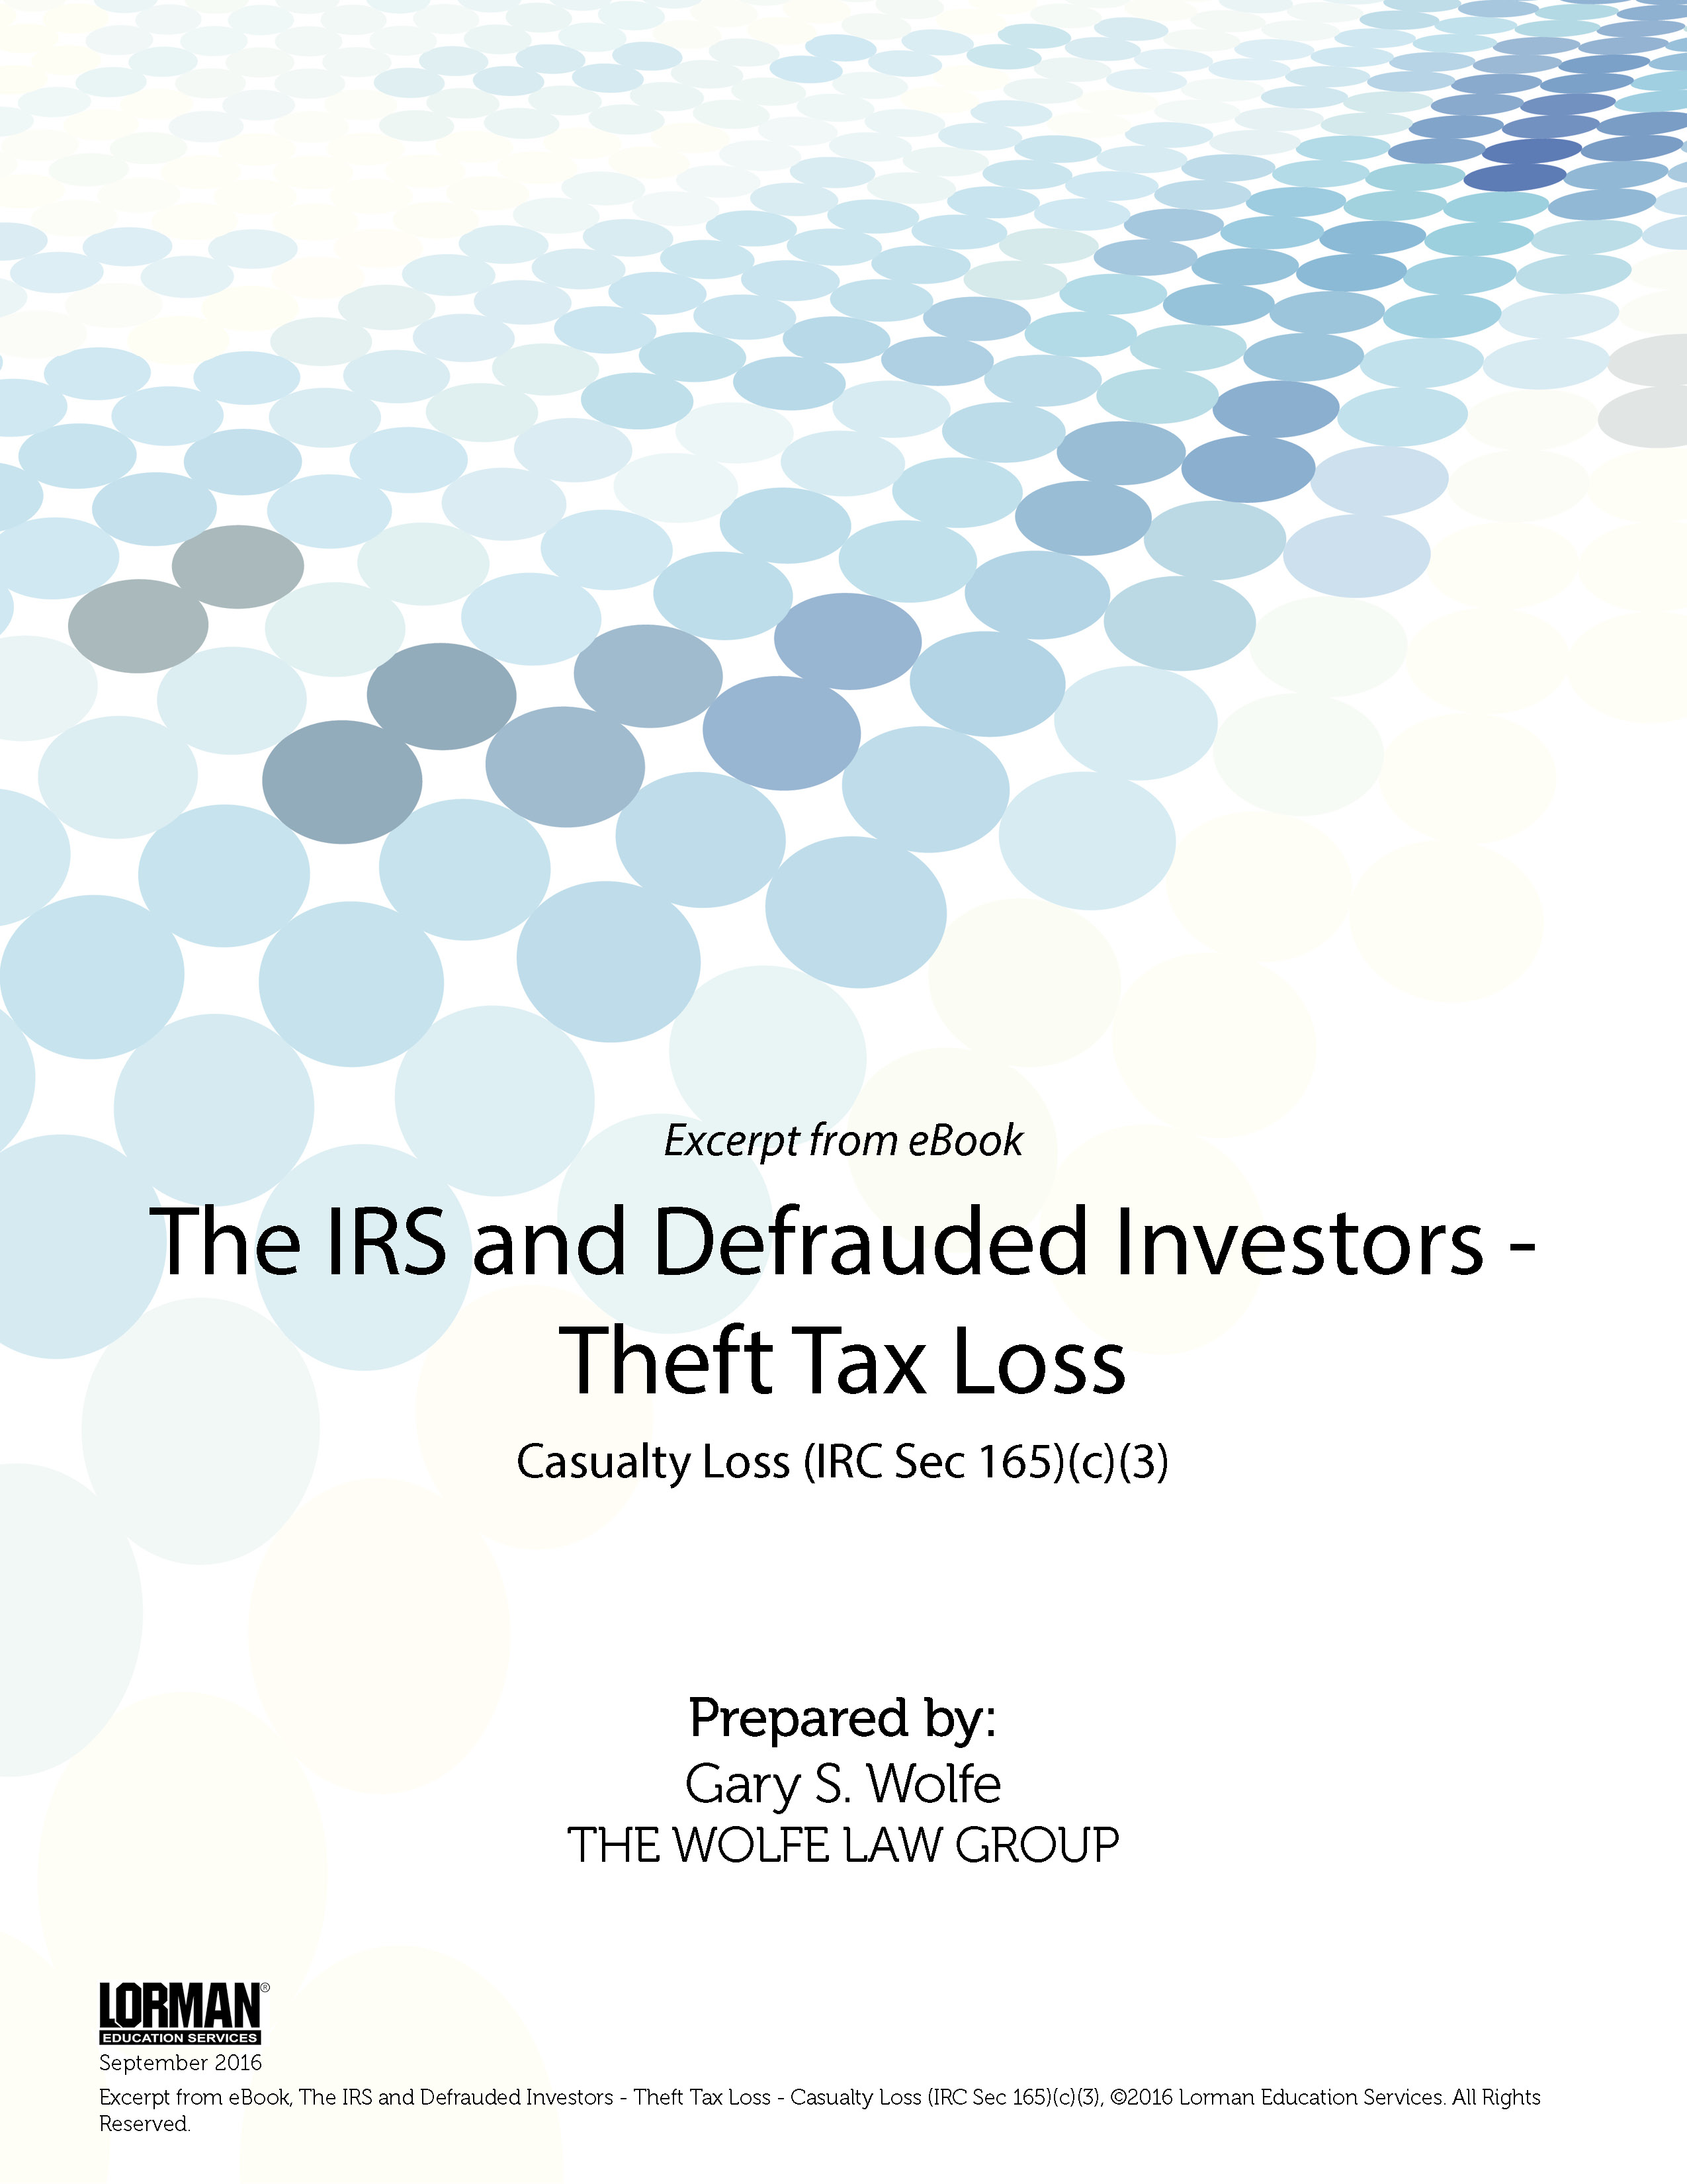 The IRS and Defrauded Investors: Theft Tax Loss - Casualty Loss (IRC Sec 165)(c)(3)